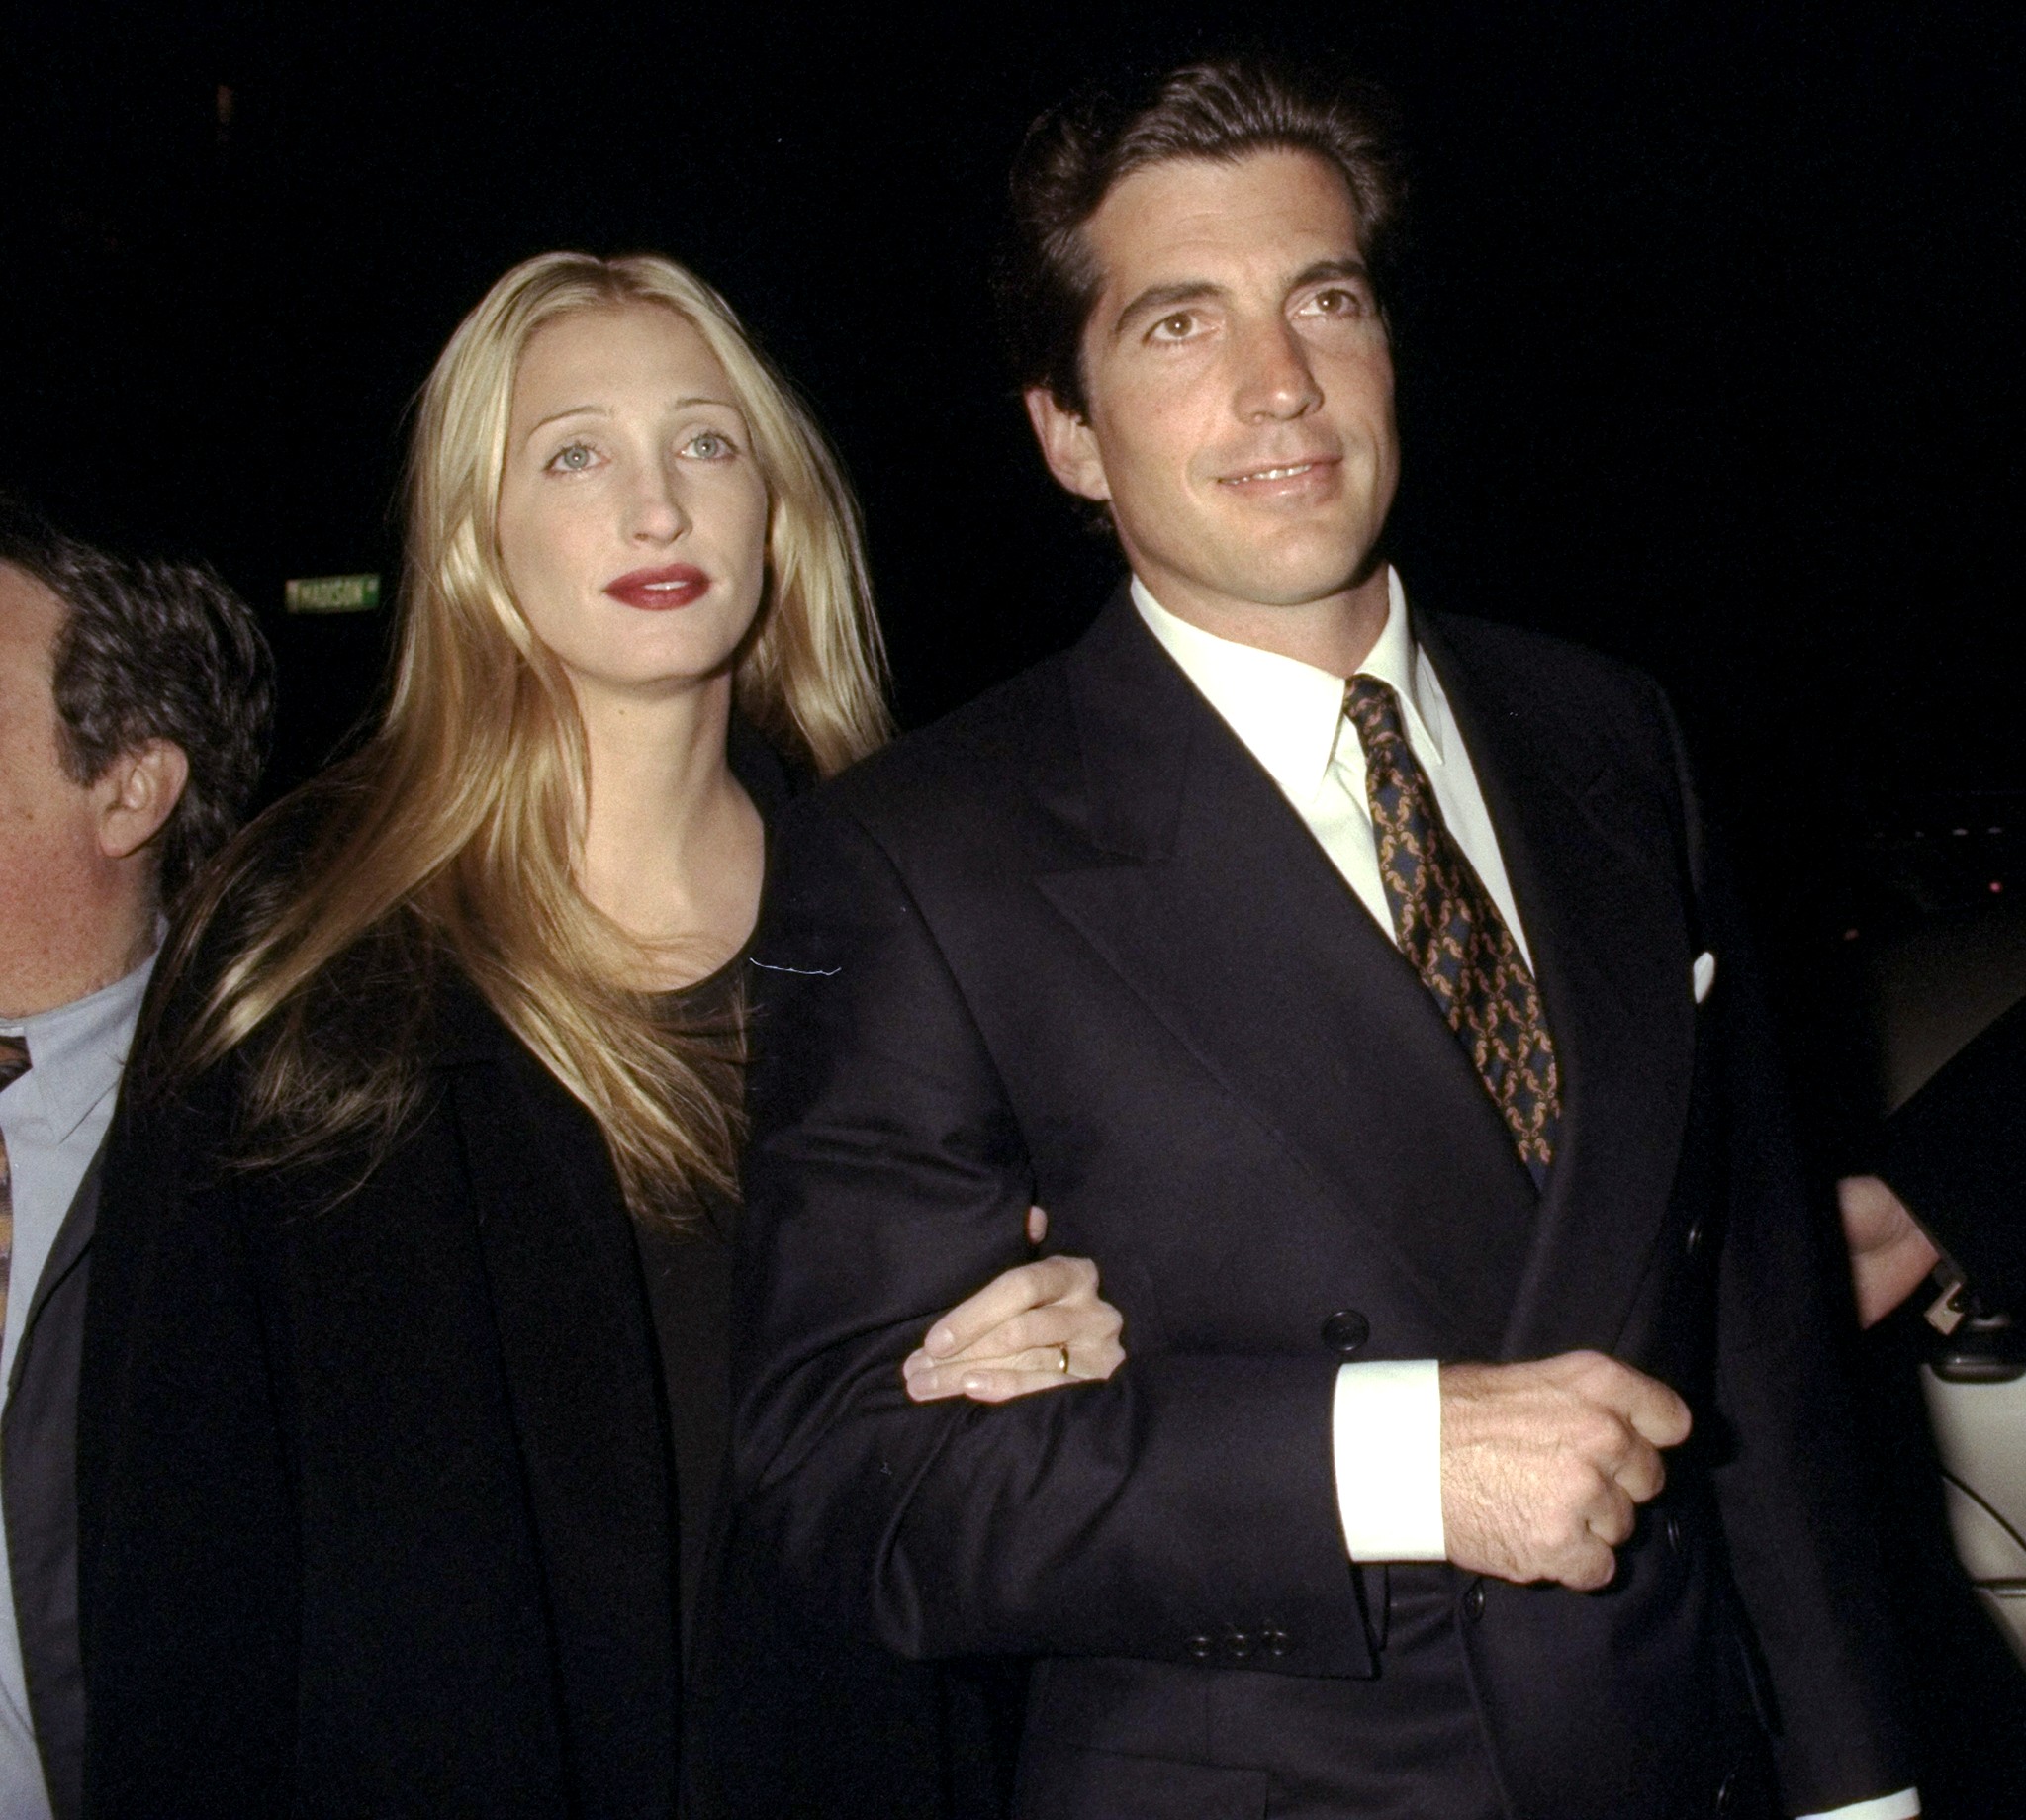 John Kennedy Jr. with wife, Carolyn Bessette Kennedy at Asia de Cuba Restaurant in 1997 | Source: Getty Images